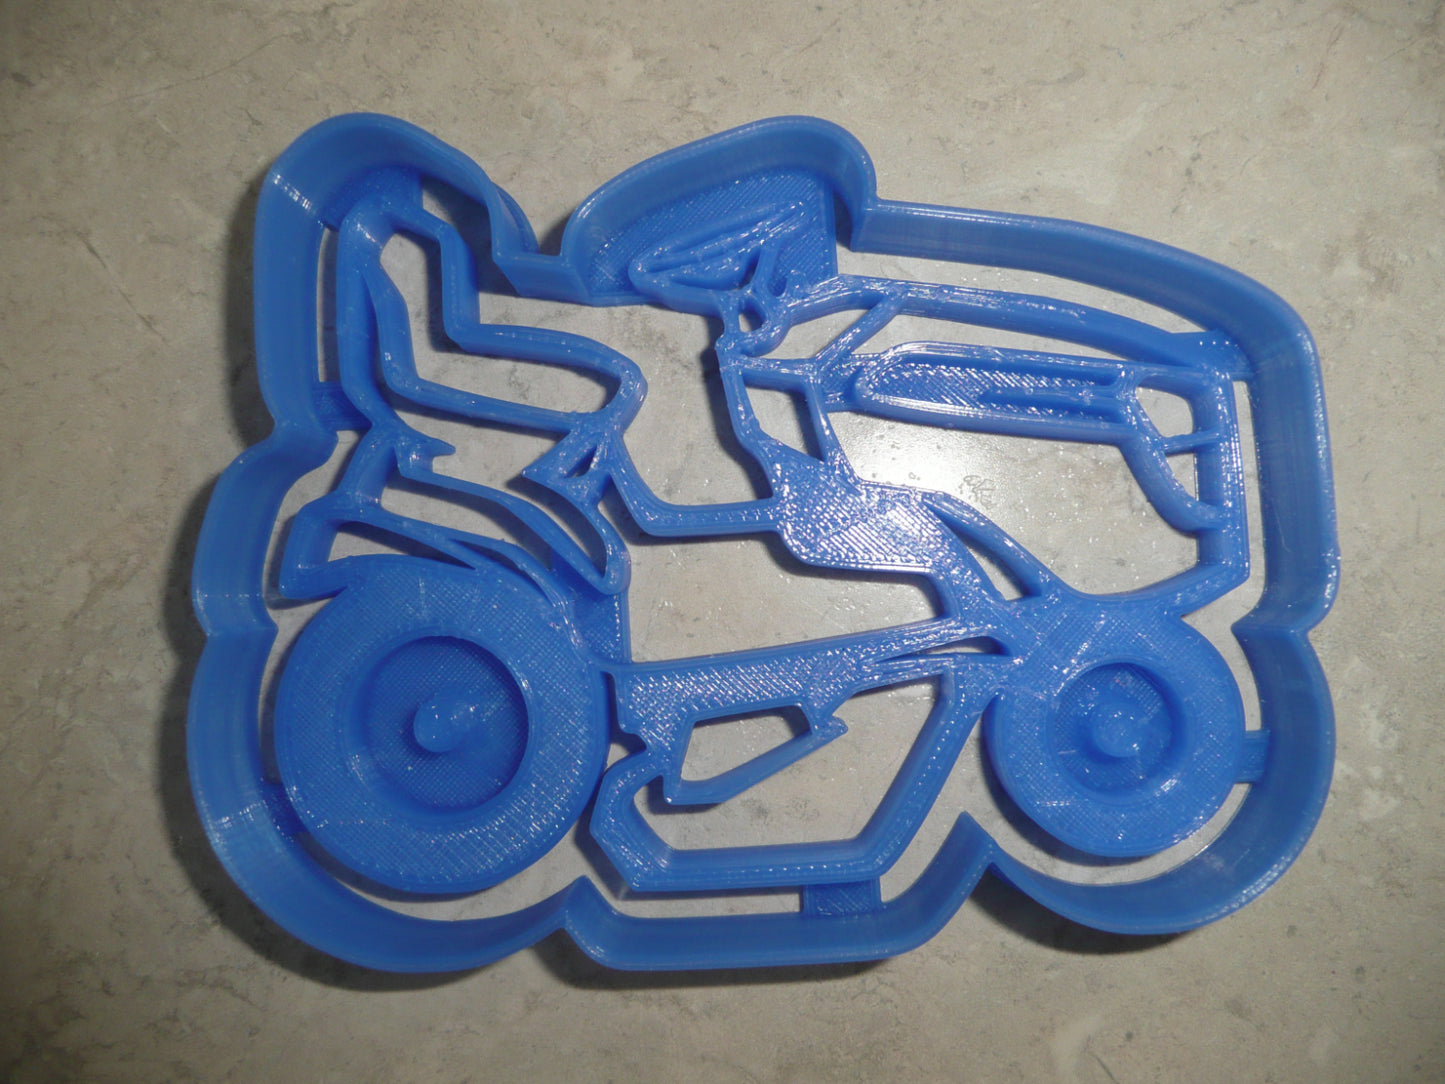 Rider Riding Mower Lawn Yard Care Equipment Cookie Cutter Made In USA PR4672